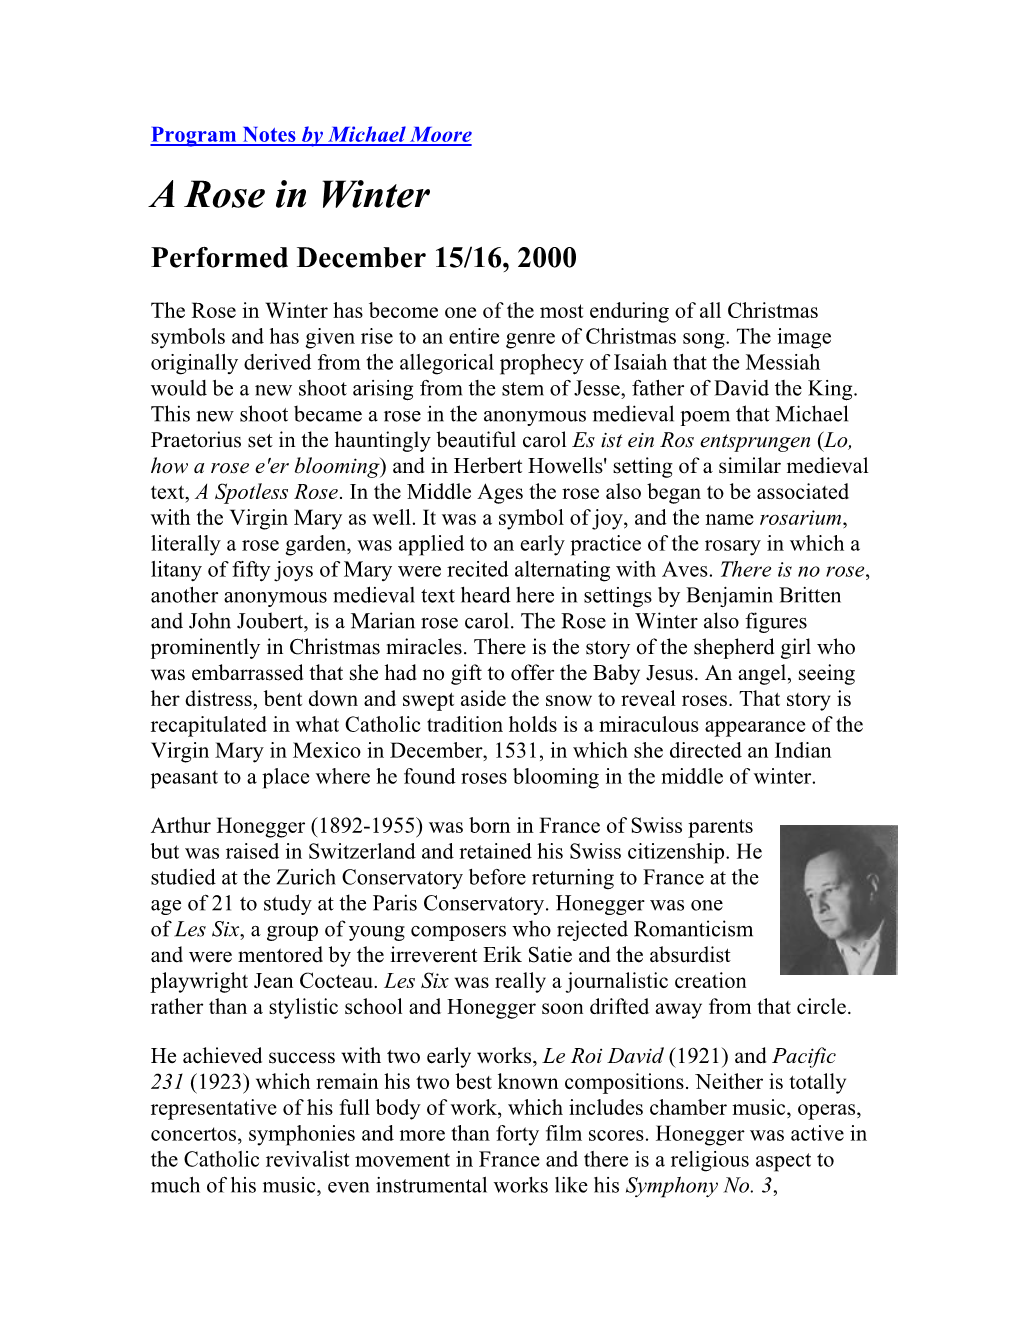 Program Notes by Michael Moore a Rose in Winter Performed December 15/16, 2000